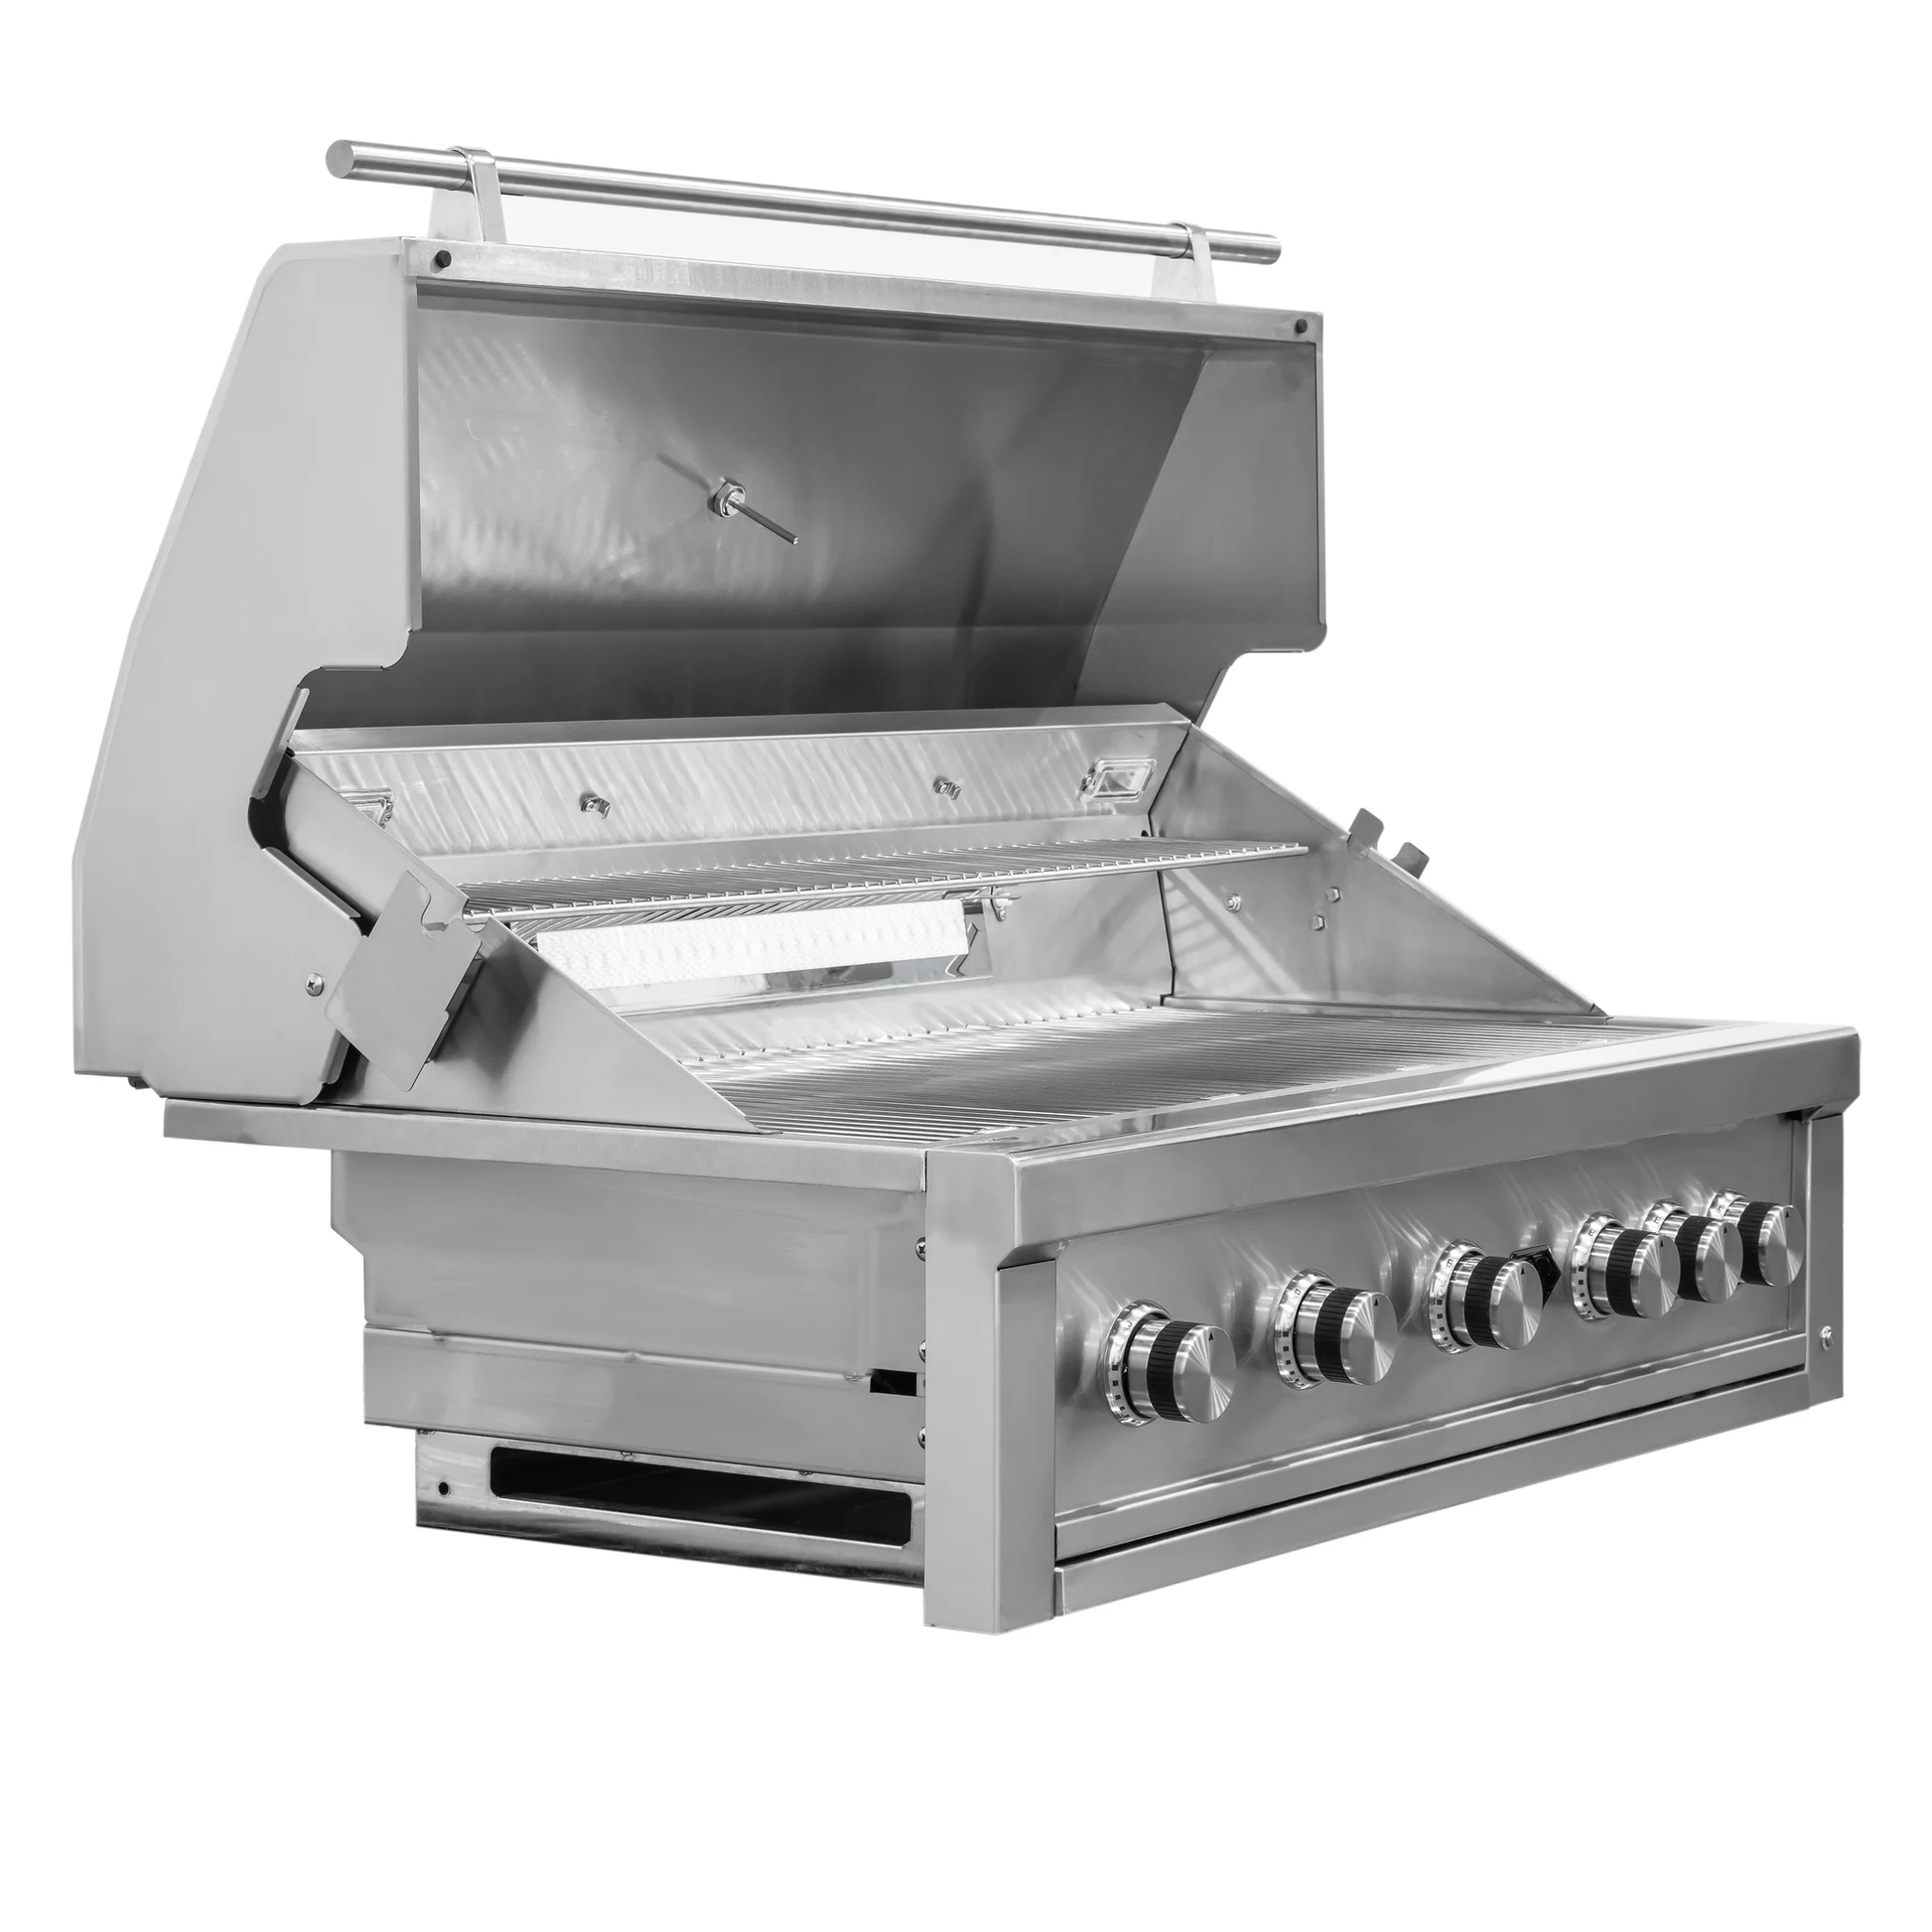 Diamond Grill BBQ 42" Stainless Steel Liquid Propane 5-Burner Grill With Infrared Burner